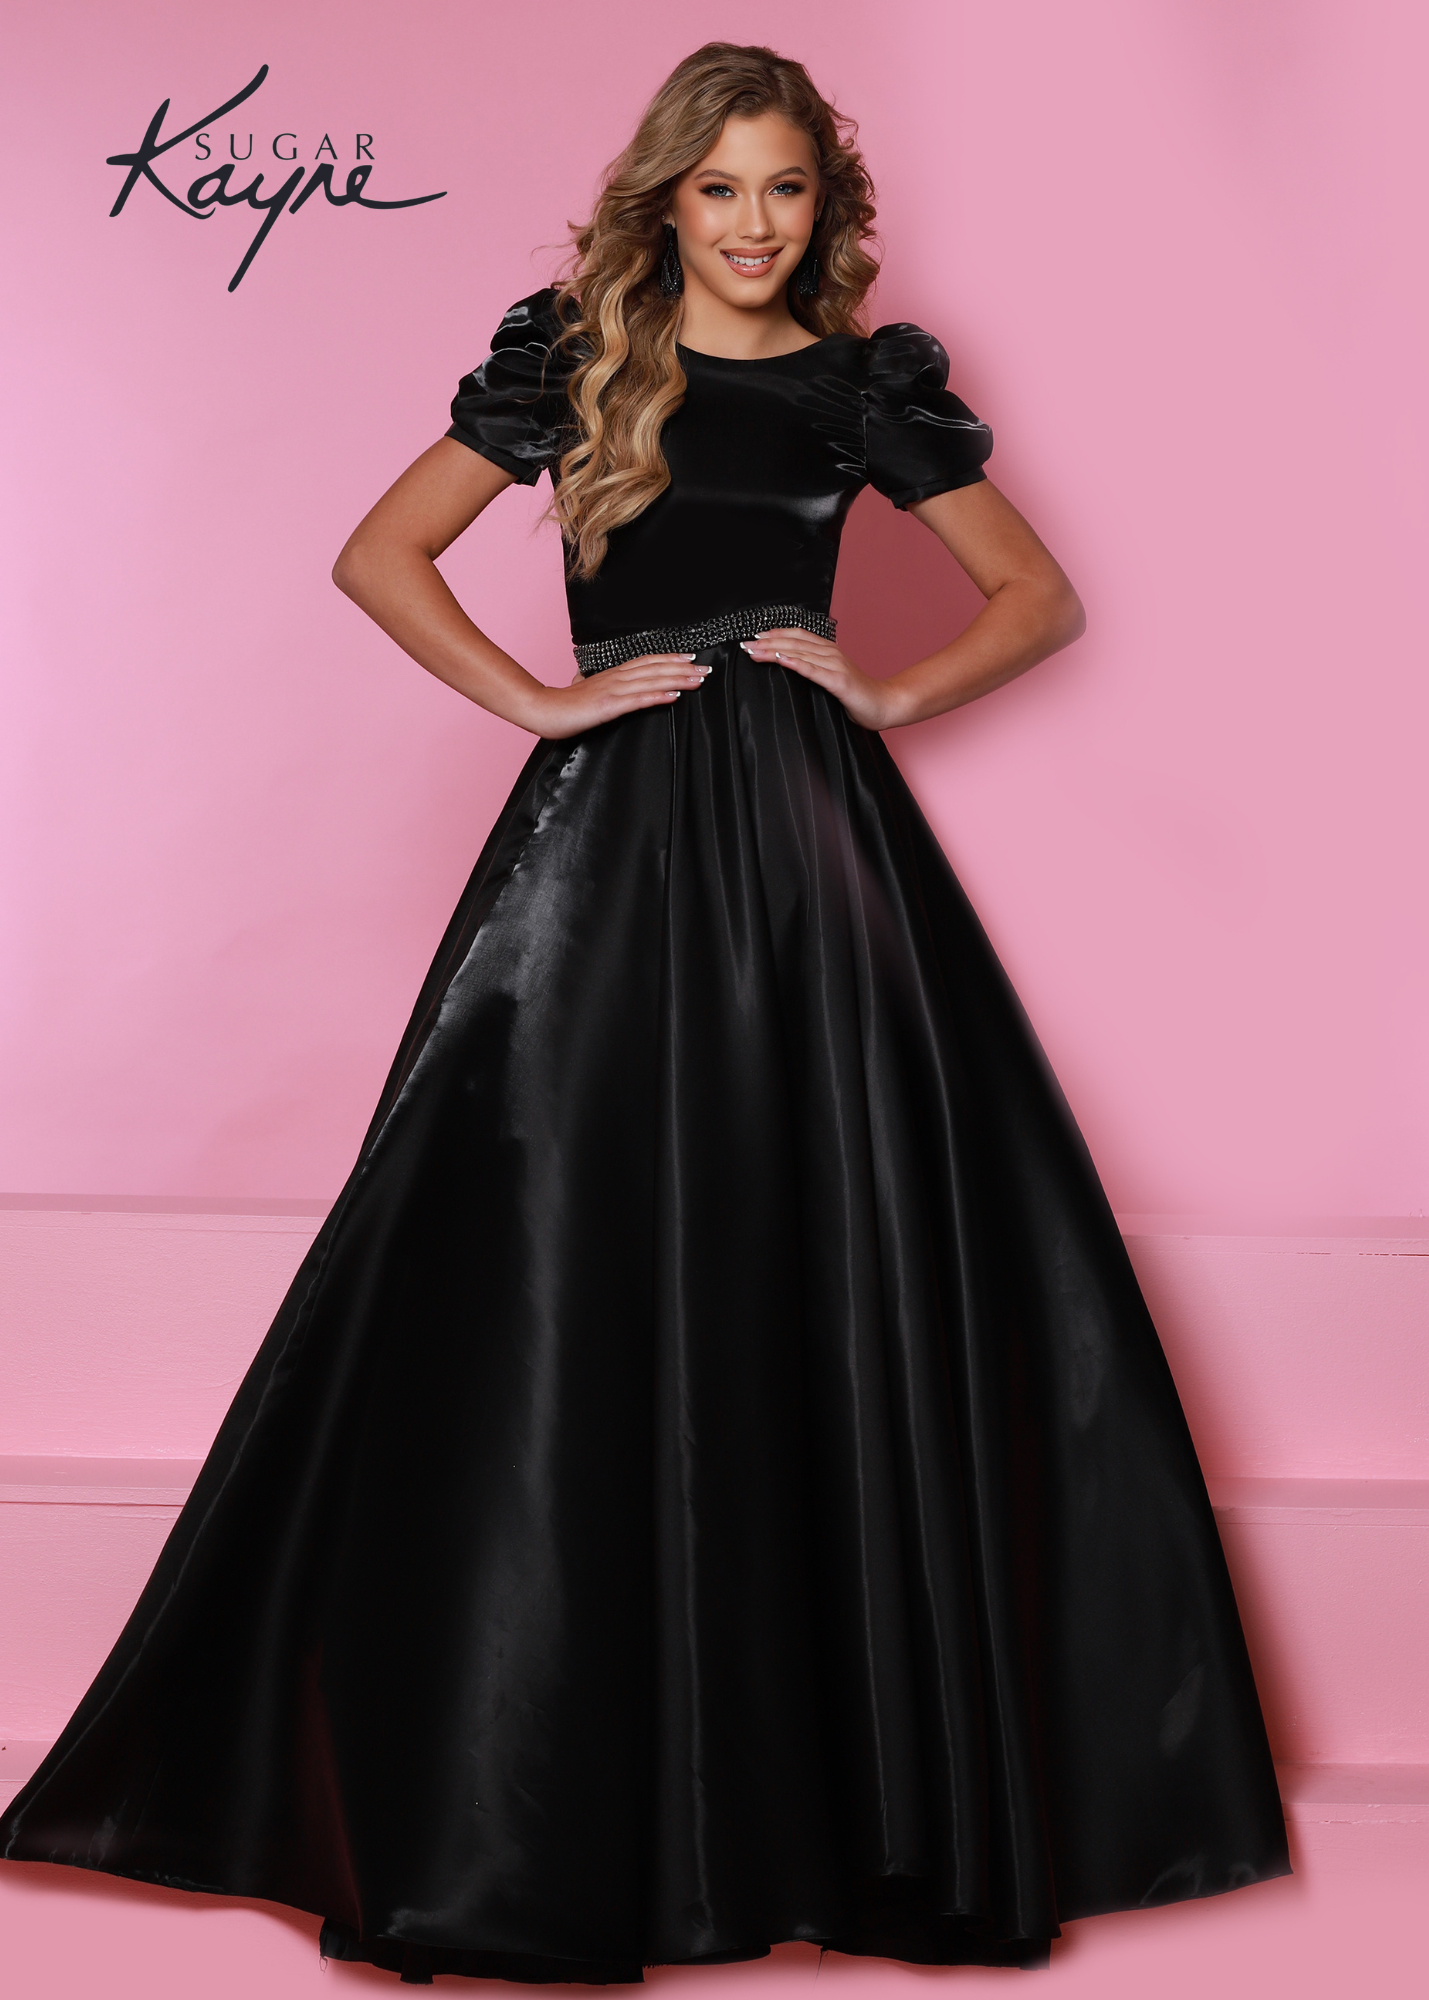 Sugar Kayne C325 short cocktail dress long satin cap sleeve overskirt Pageant Gown Girls Endless possibilities with this shimmer satin dress- make your fit short or long with the detachable beaded belt overskirt! Colors: Aqua, Cherry, Black, White Sizes: 2, 4, 6, 8, 10, 12, 14, 16 Fabric Shimmer Satin, Satin Lining